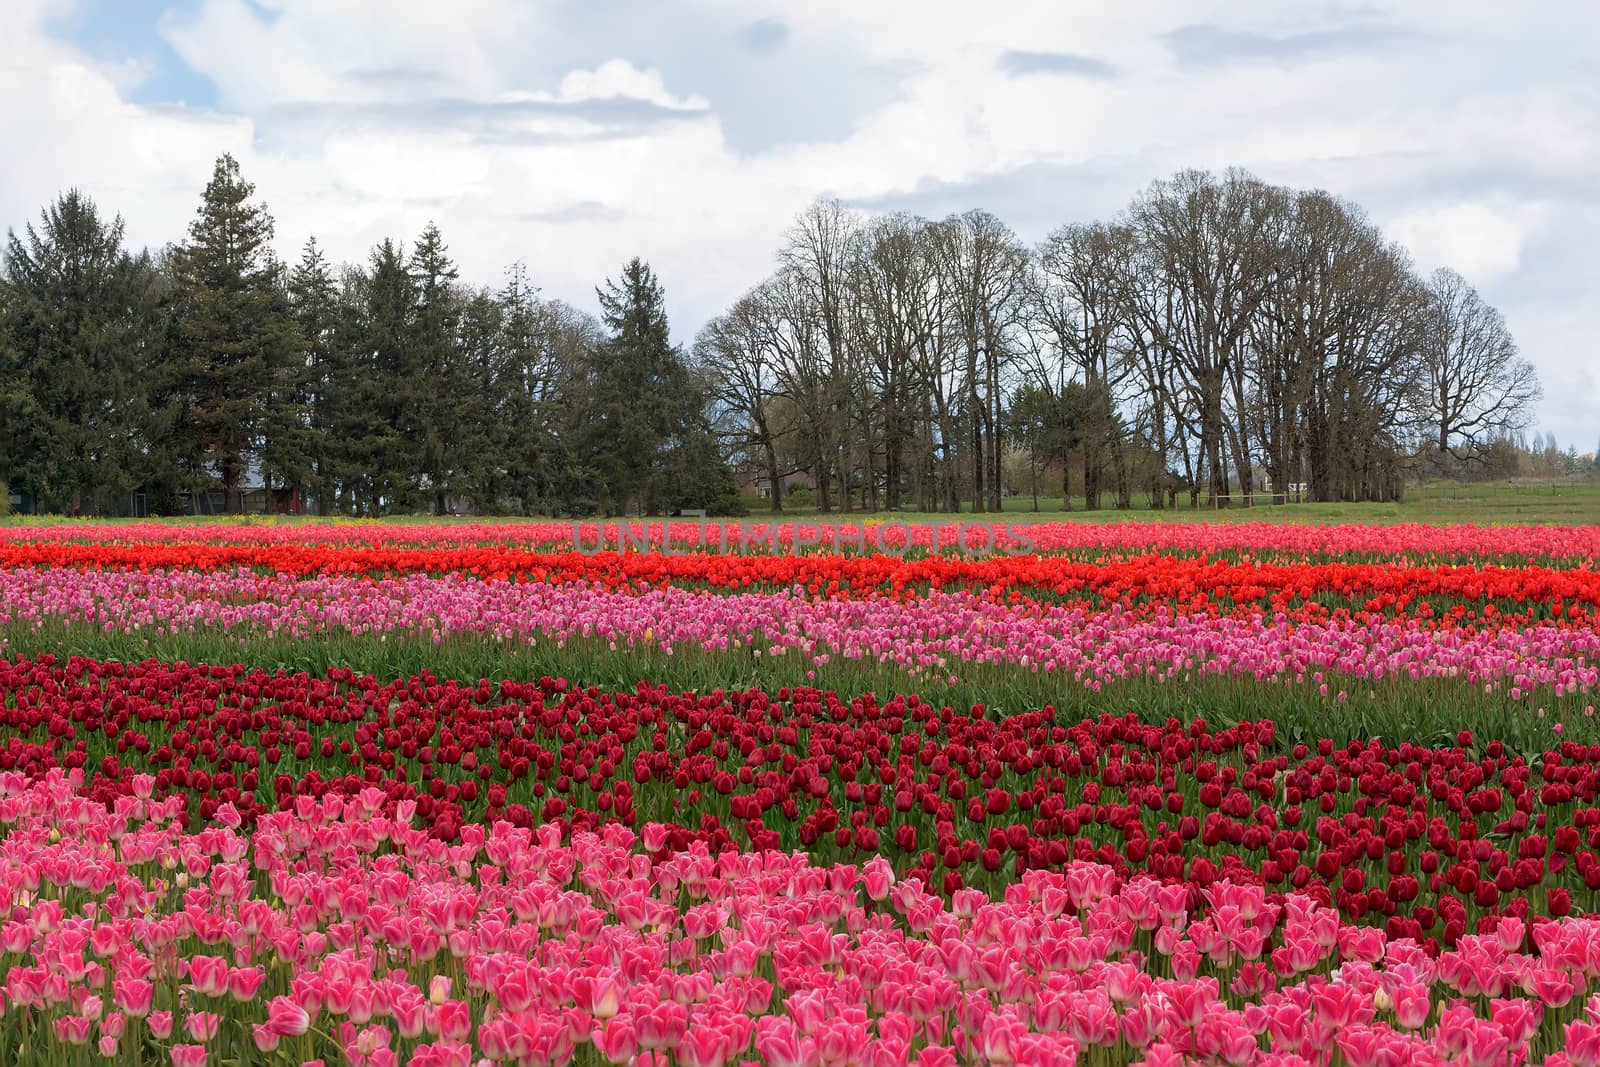 Bright red and pink colorful tulips blooming at Wooden Shoe Tulip Festival in Woodburn Oregon